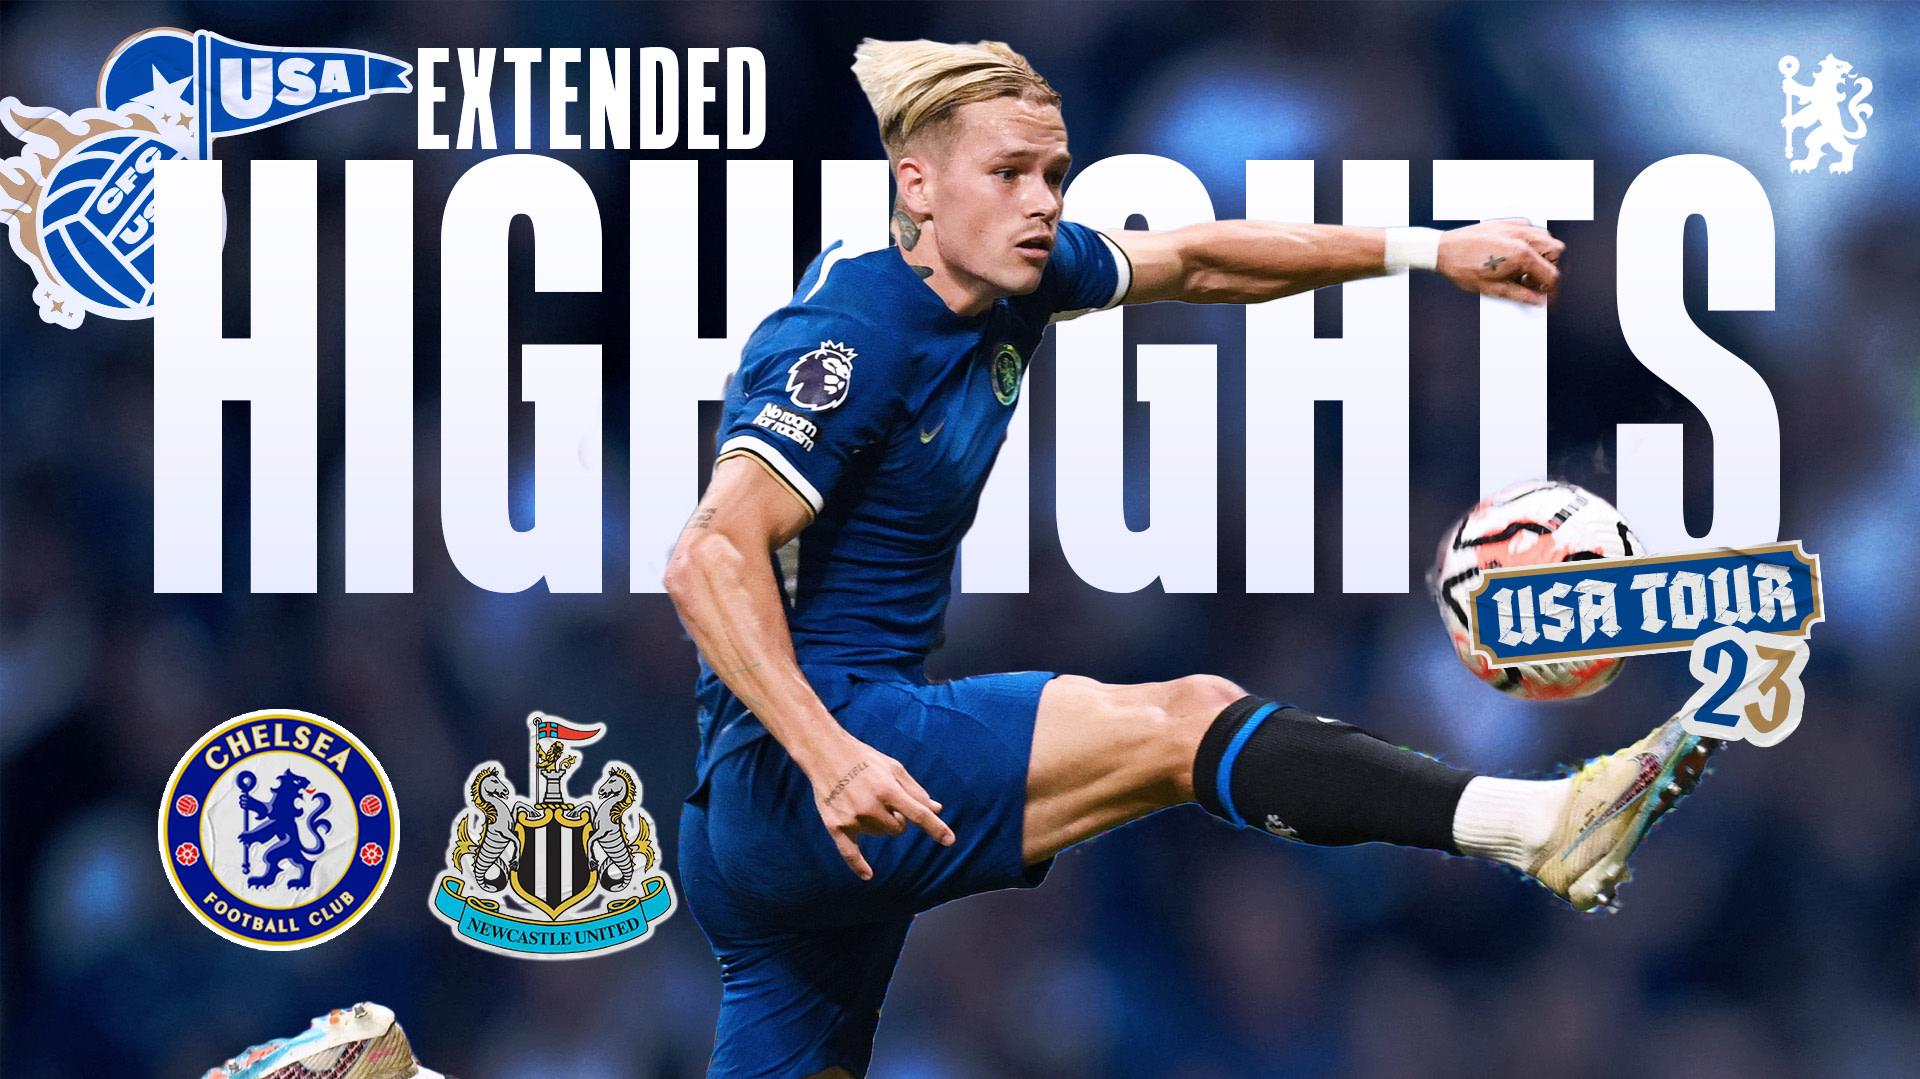 Extended Chelsea Newcastle United Video Official Site